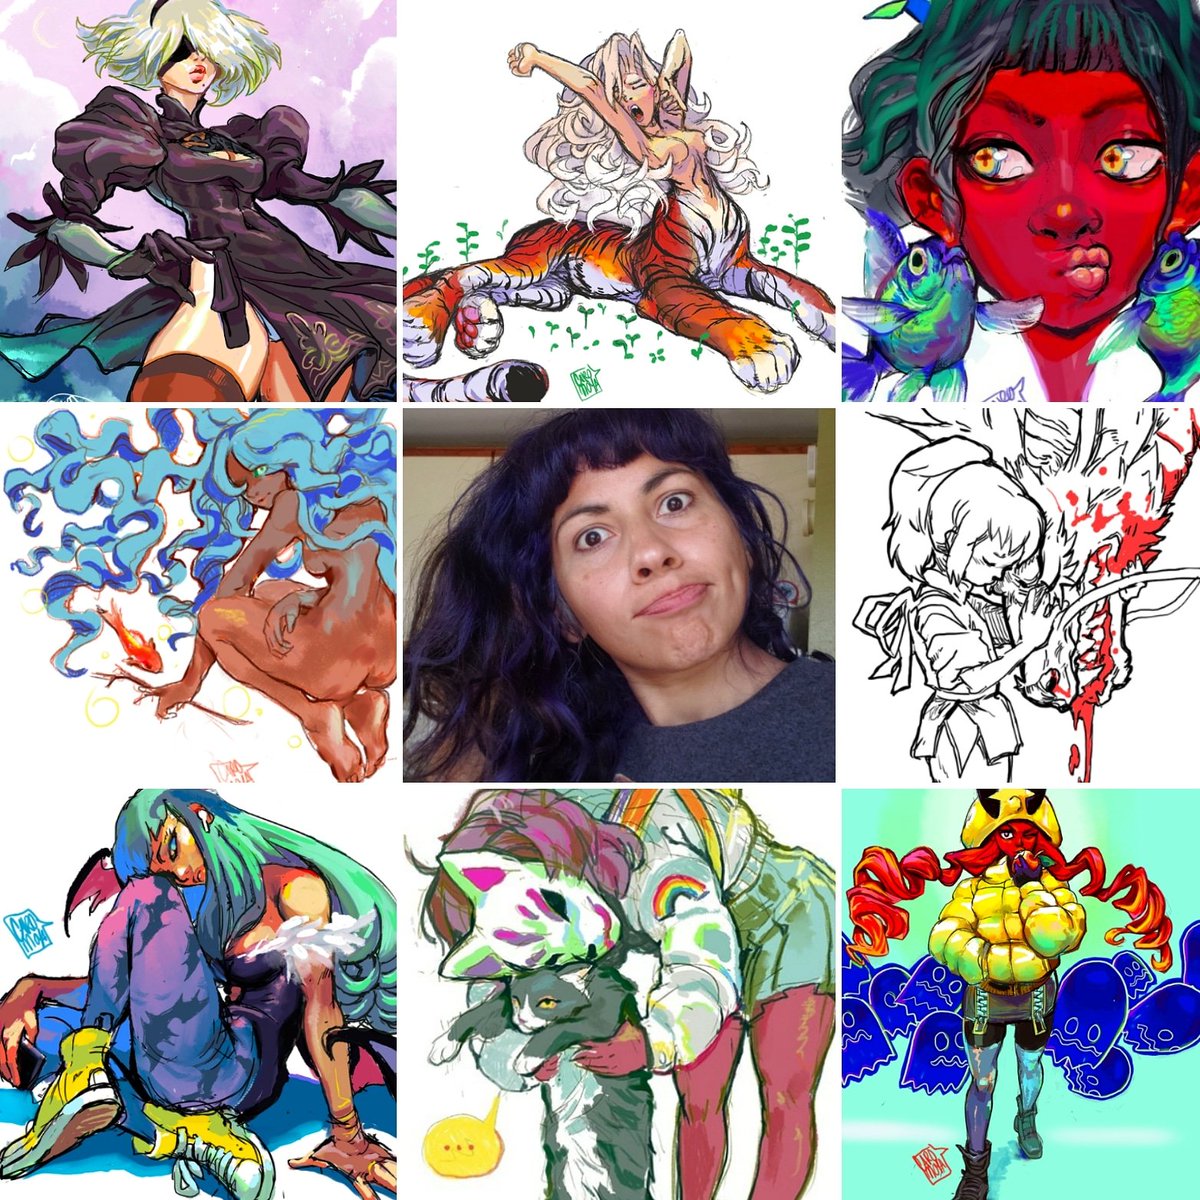 Tis the season for fighting your own drawings with your face. #artvsartist2020 